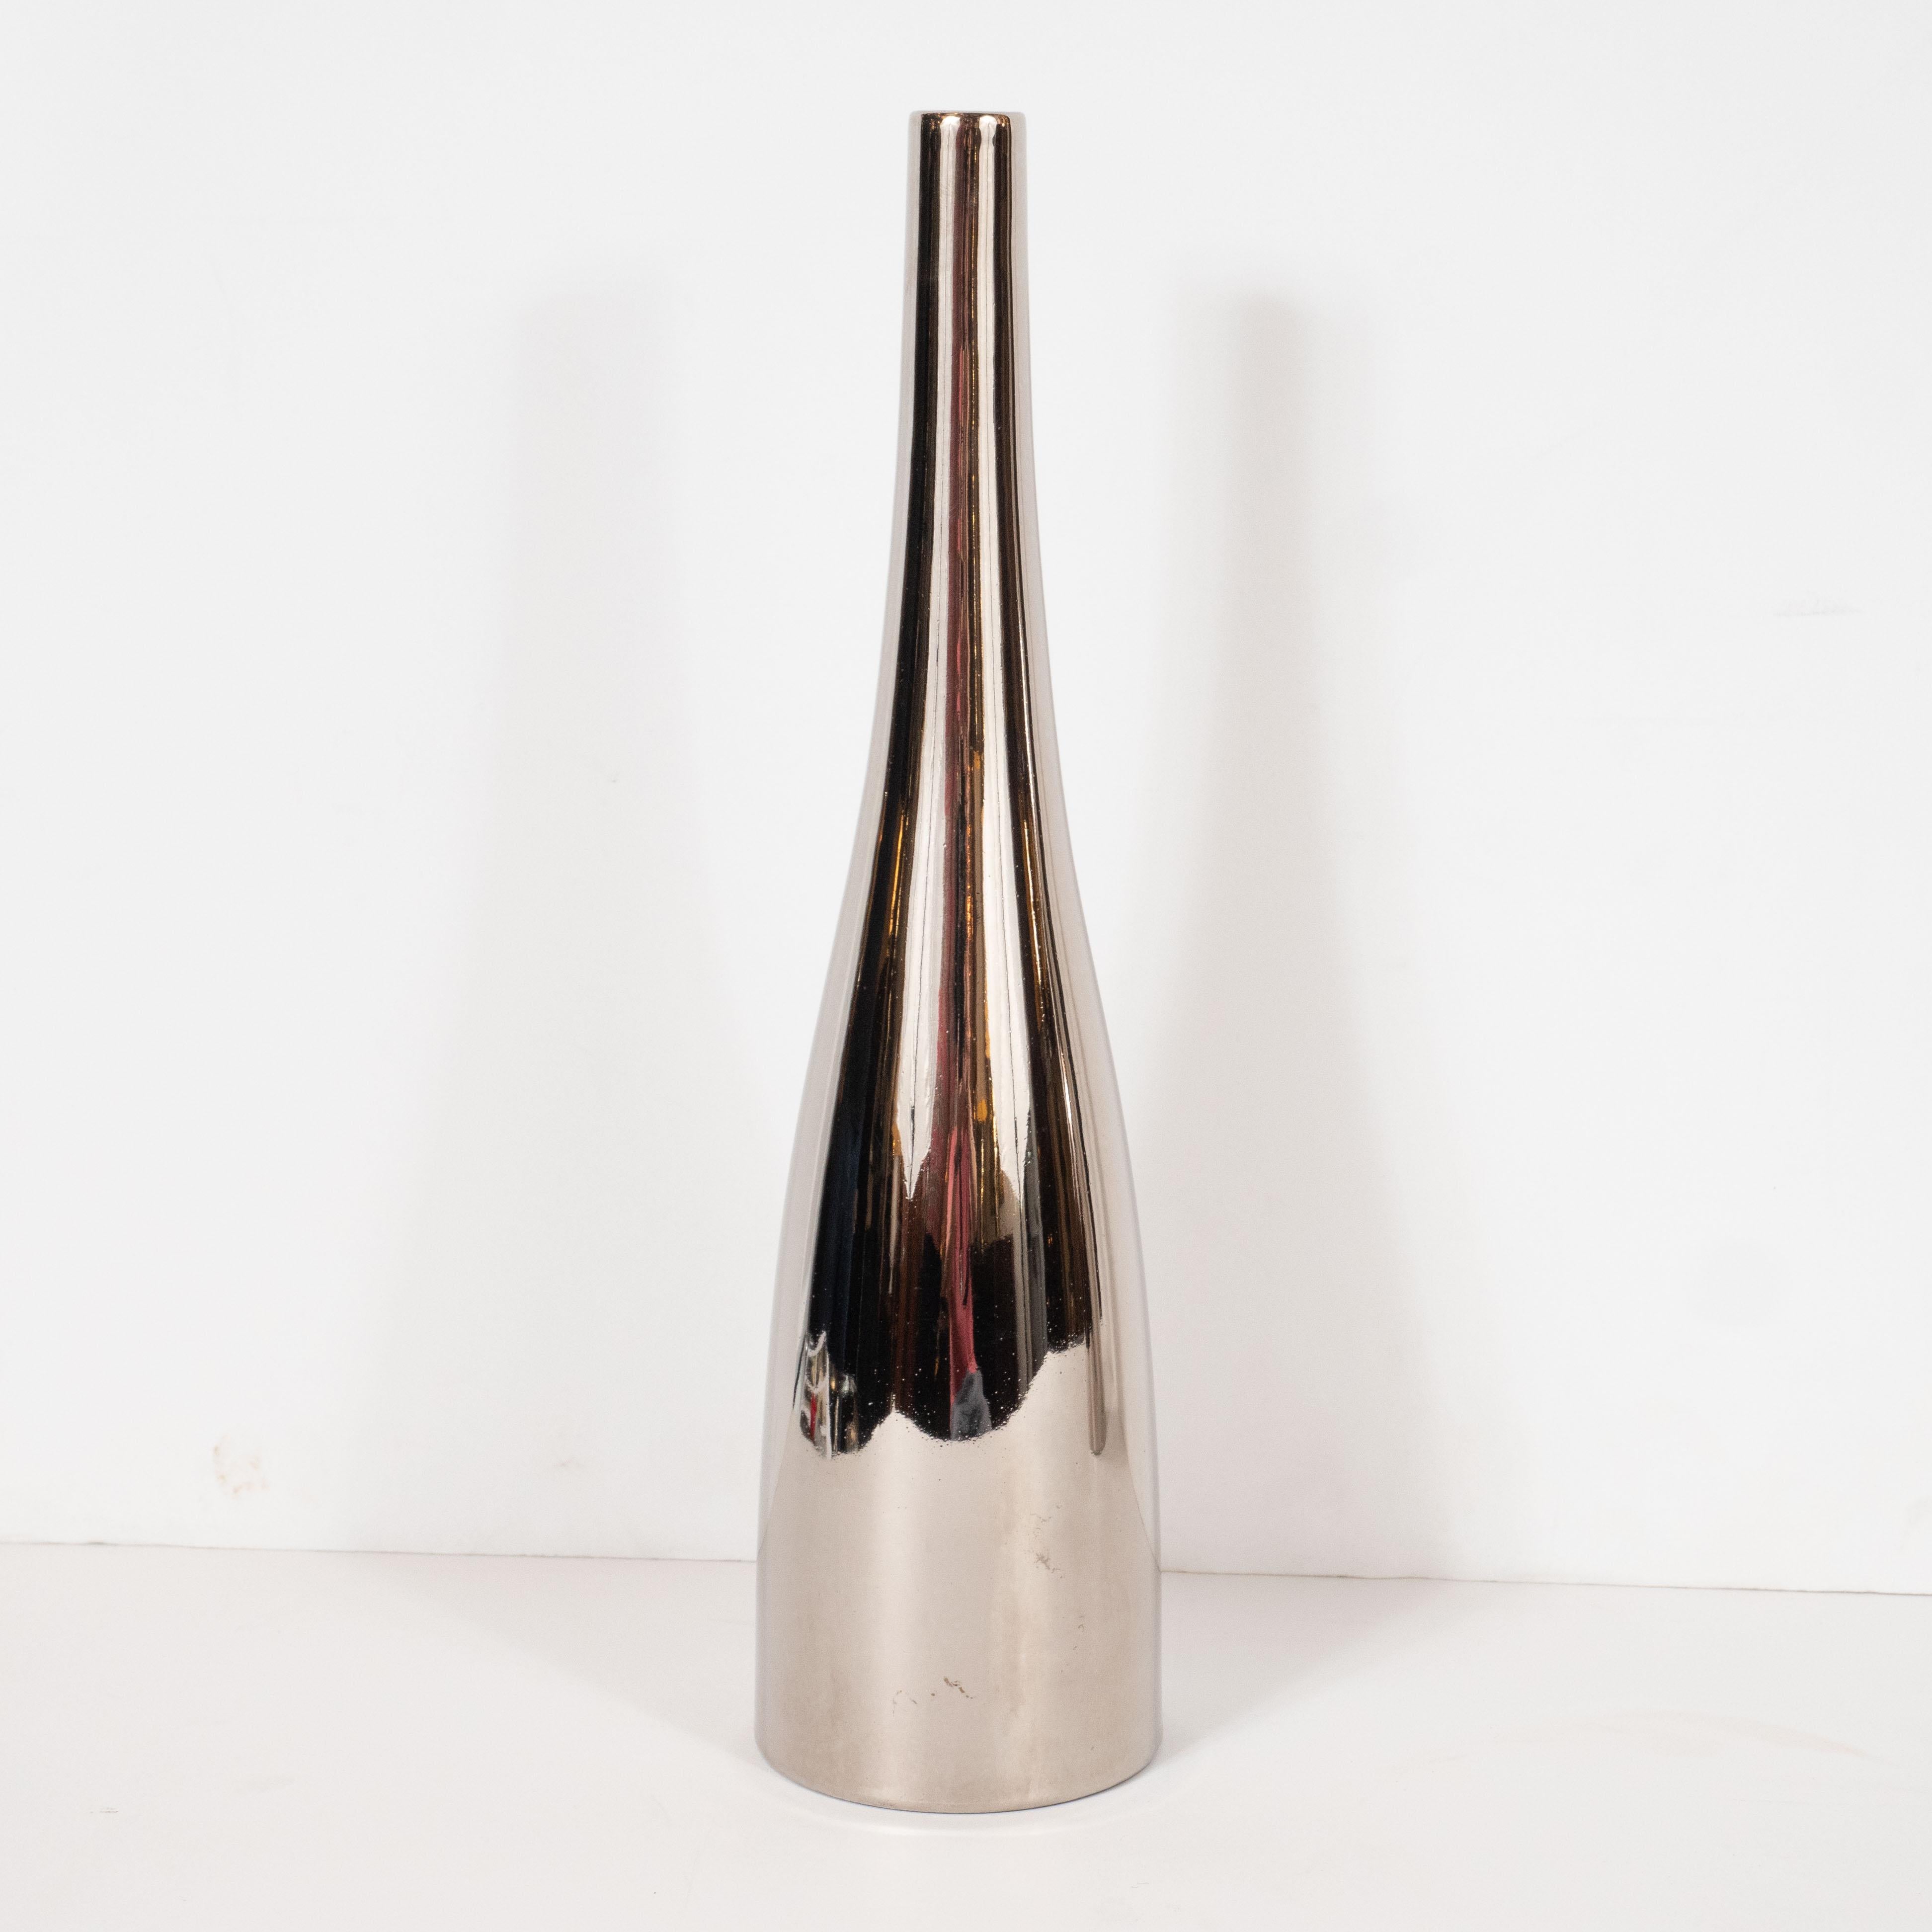 This stunning pair of Mid-Century Modern vases were designed by the esteemed Jacques Molin for Faiencerie de Charolles in France. Handmade in France, these conical ceramic vases offer elegantly attenuated proportions- a conical body and slender